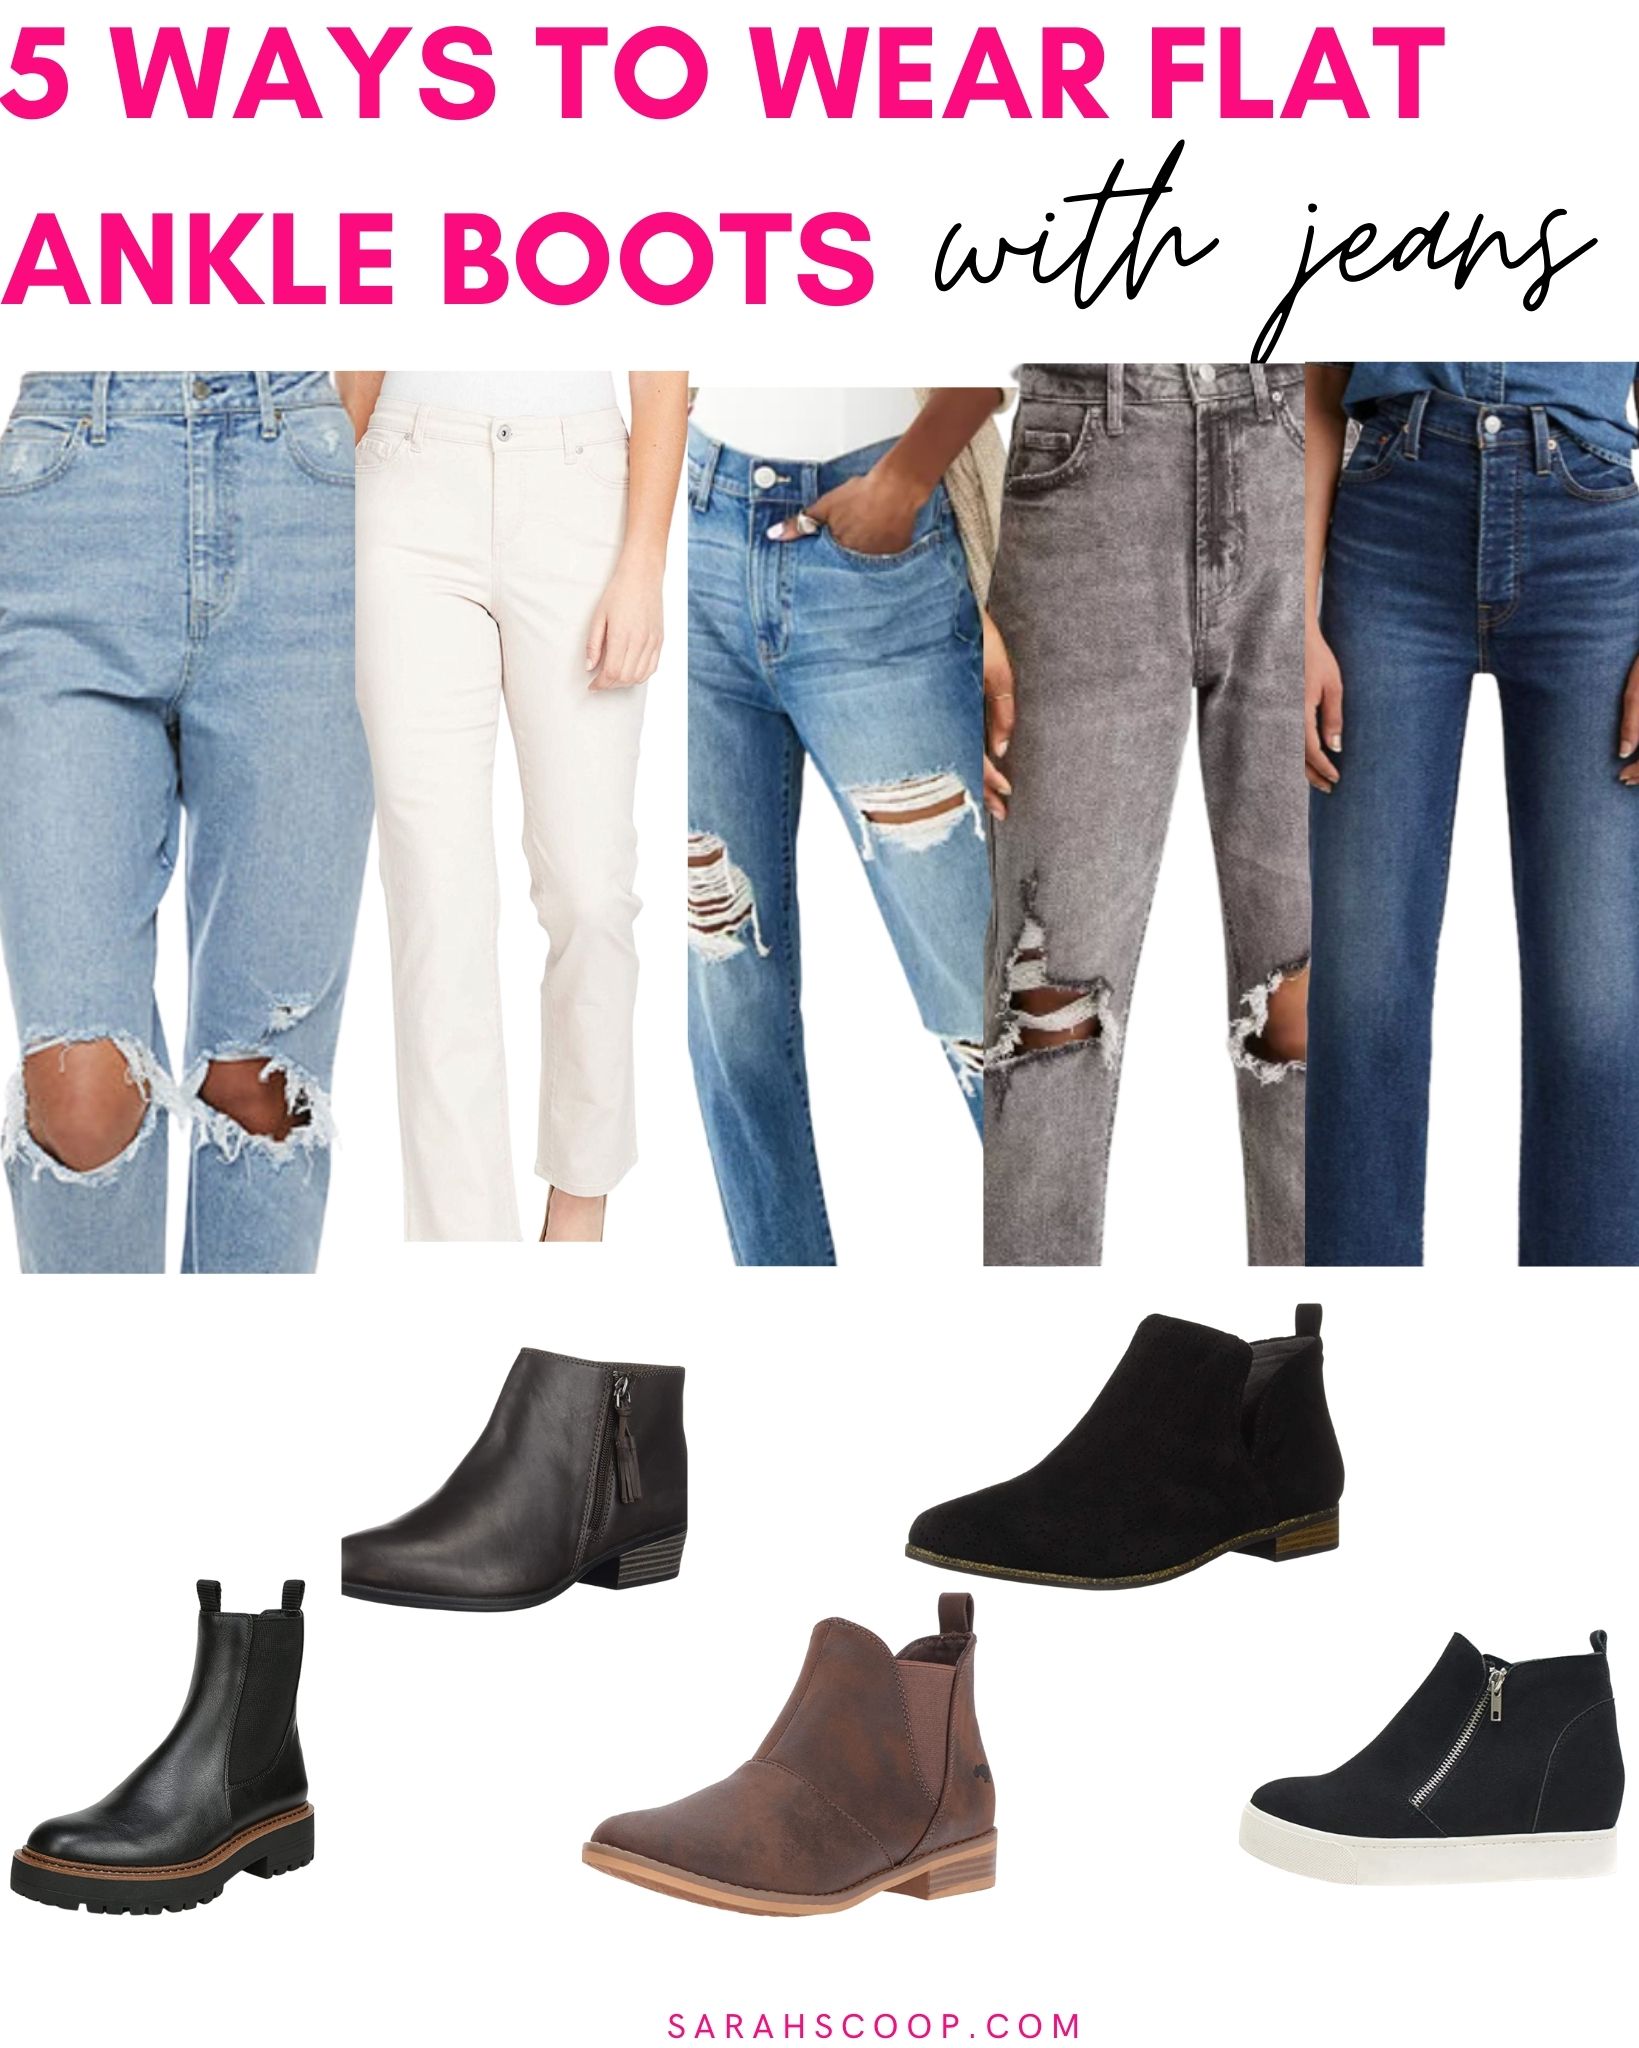 How To Wear Flat Ankle Boots? - PostureInfoHub